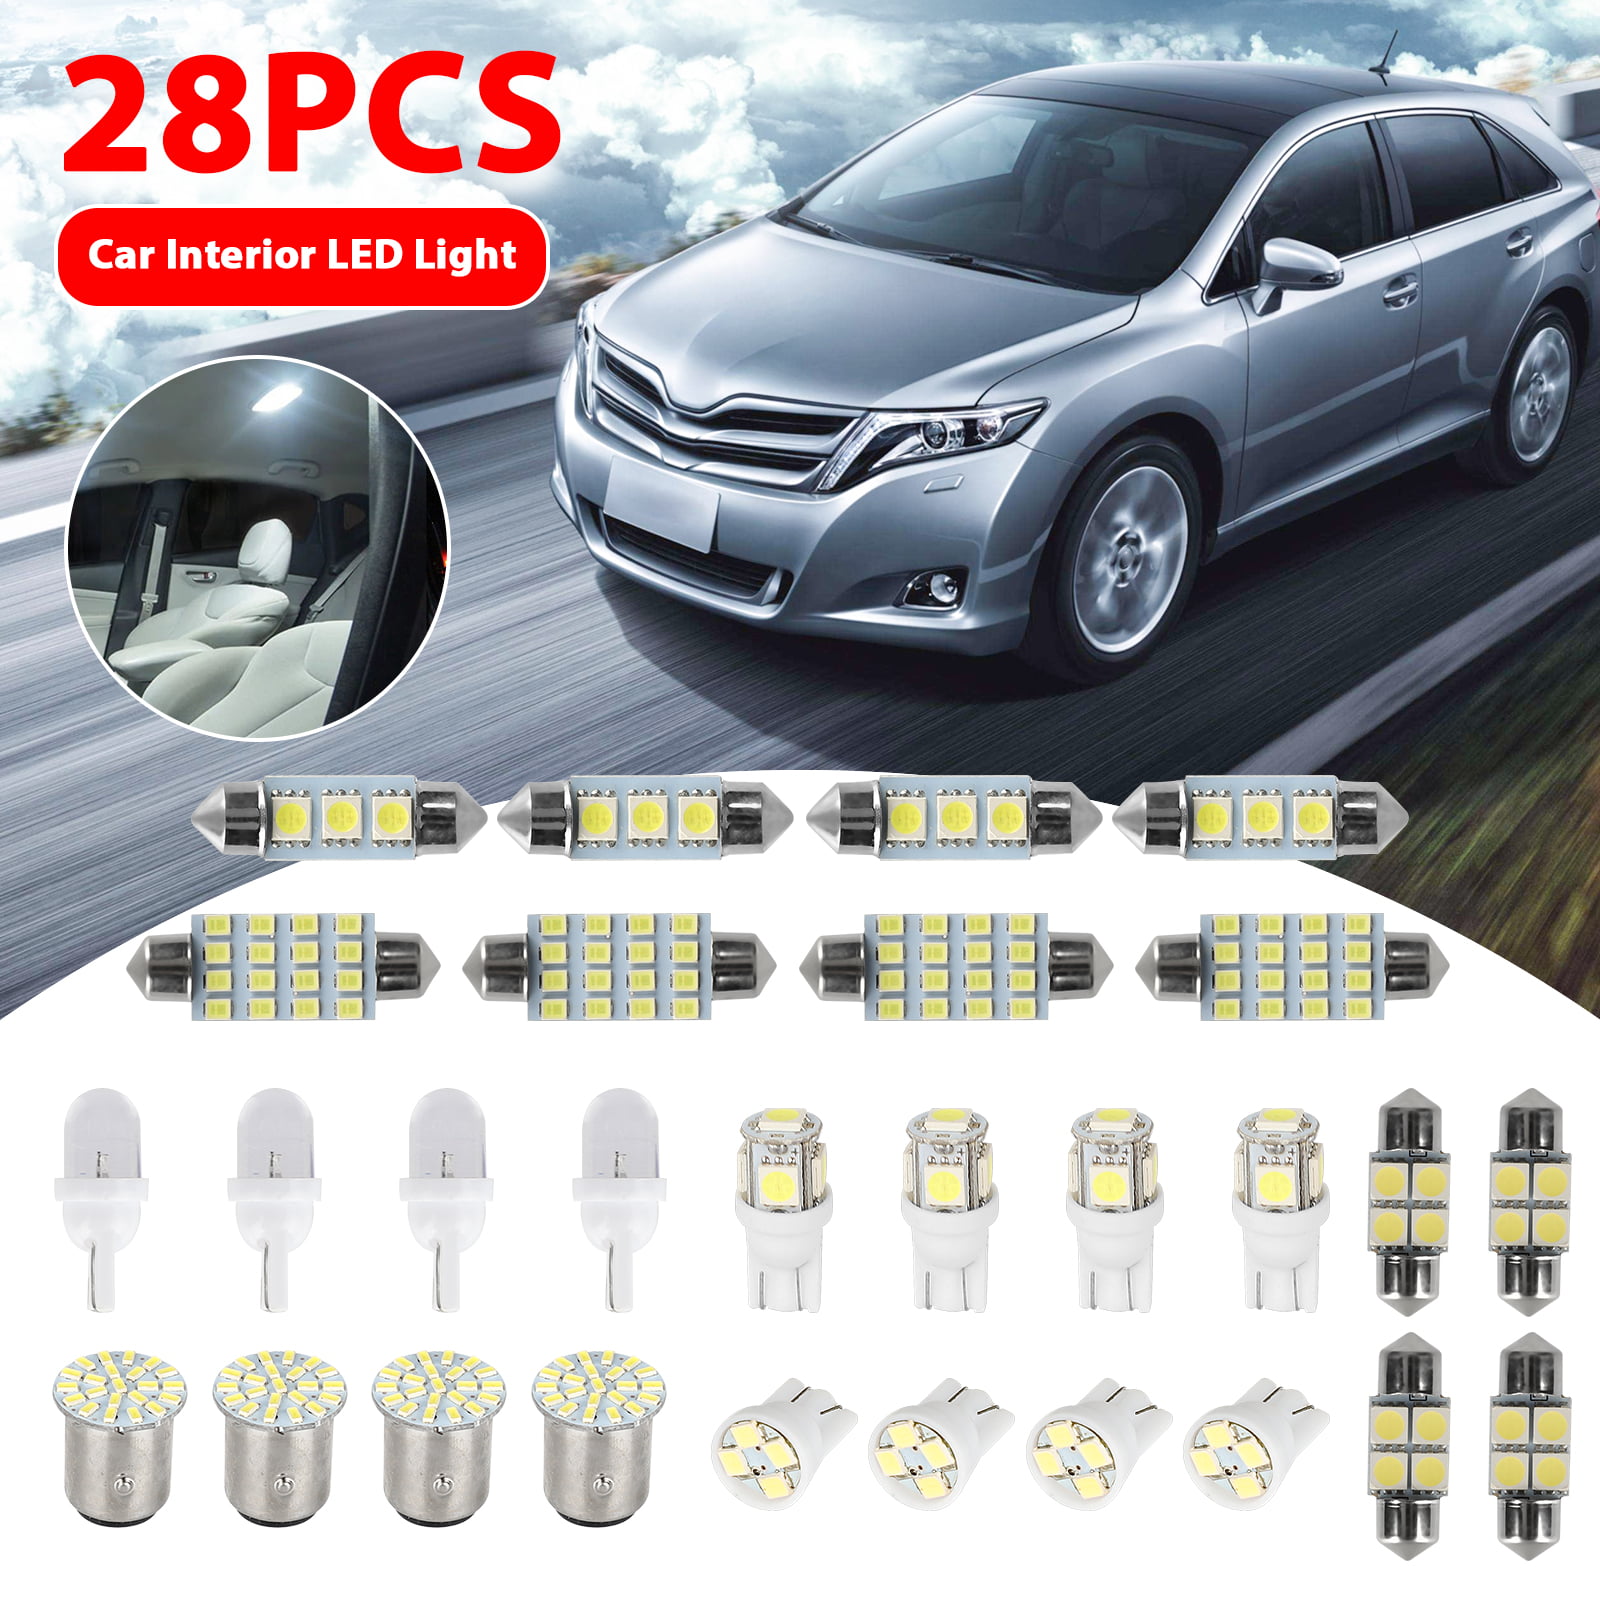 13x Auto Car Accessories Interior LED Lights For Dome License Plate Lamp 12V Kit